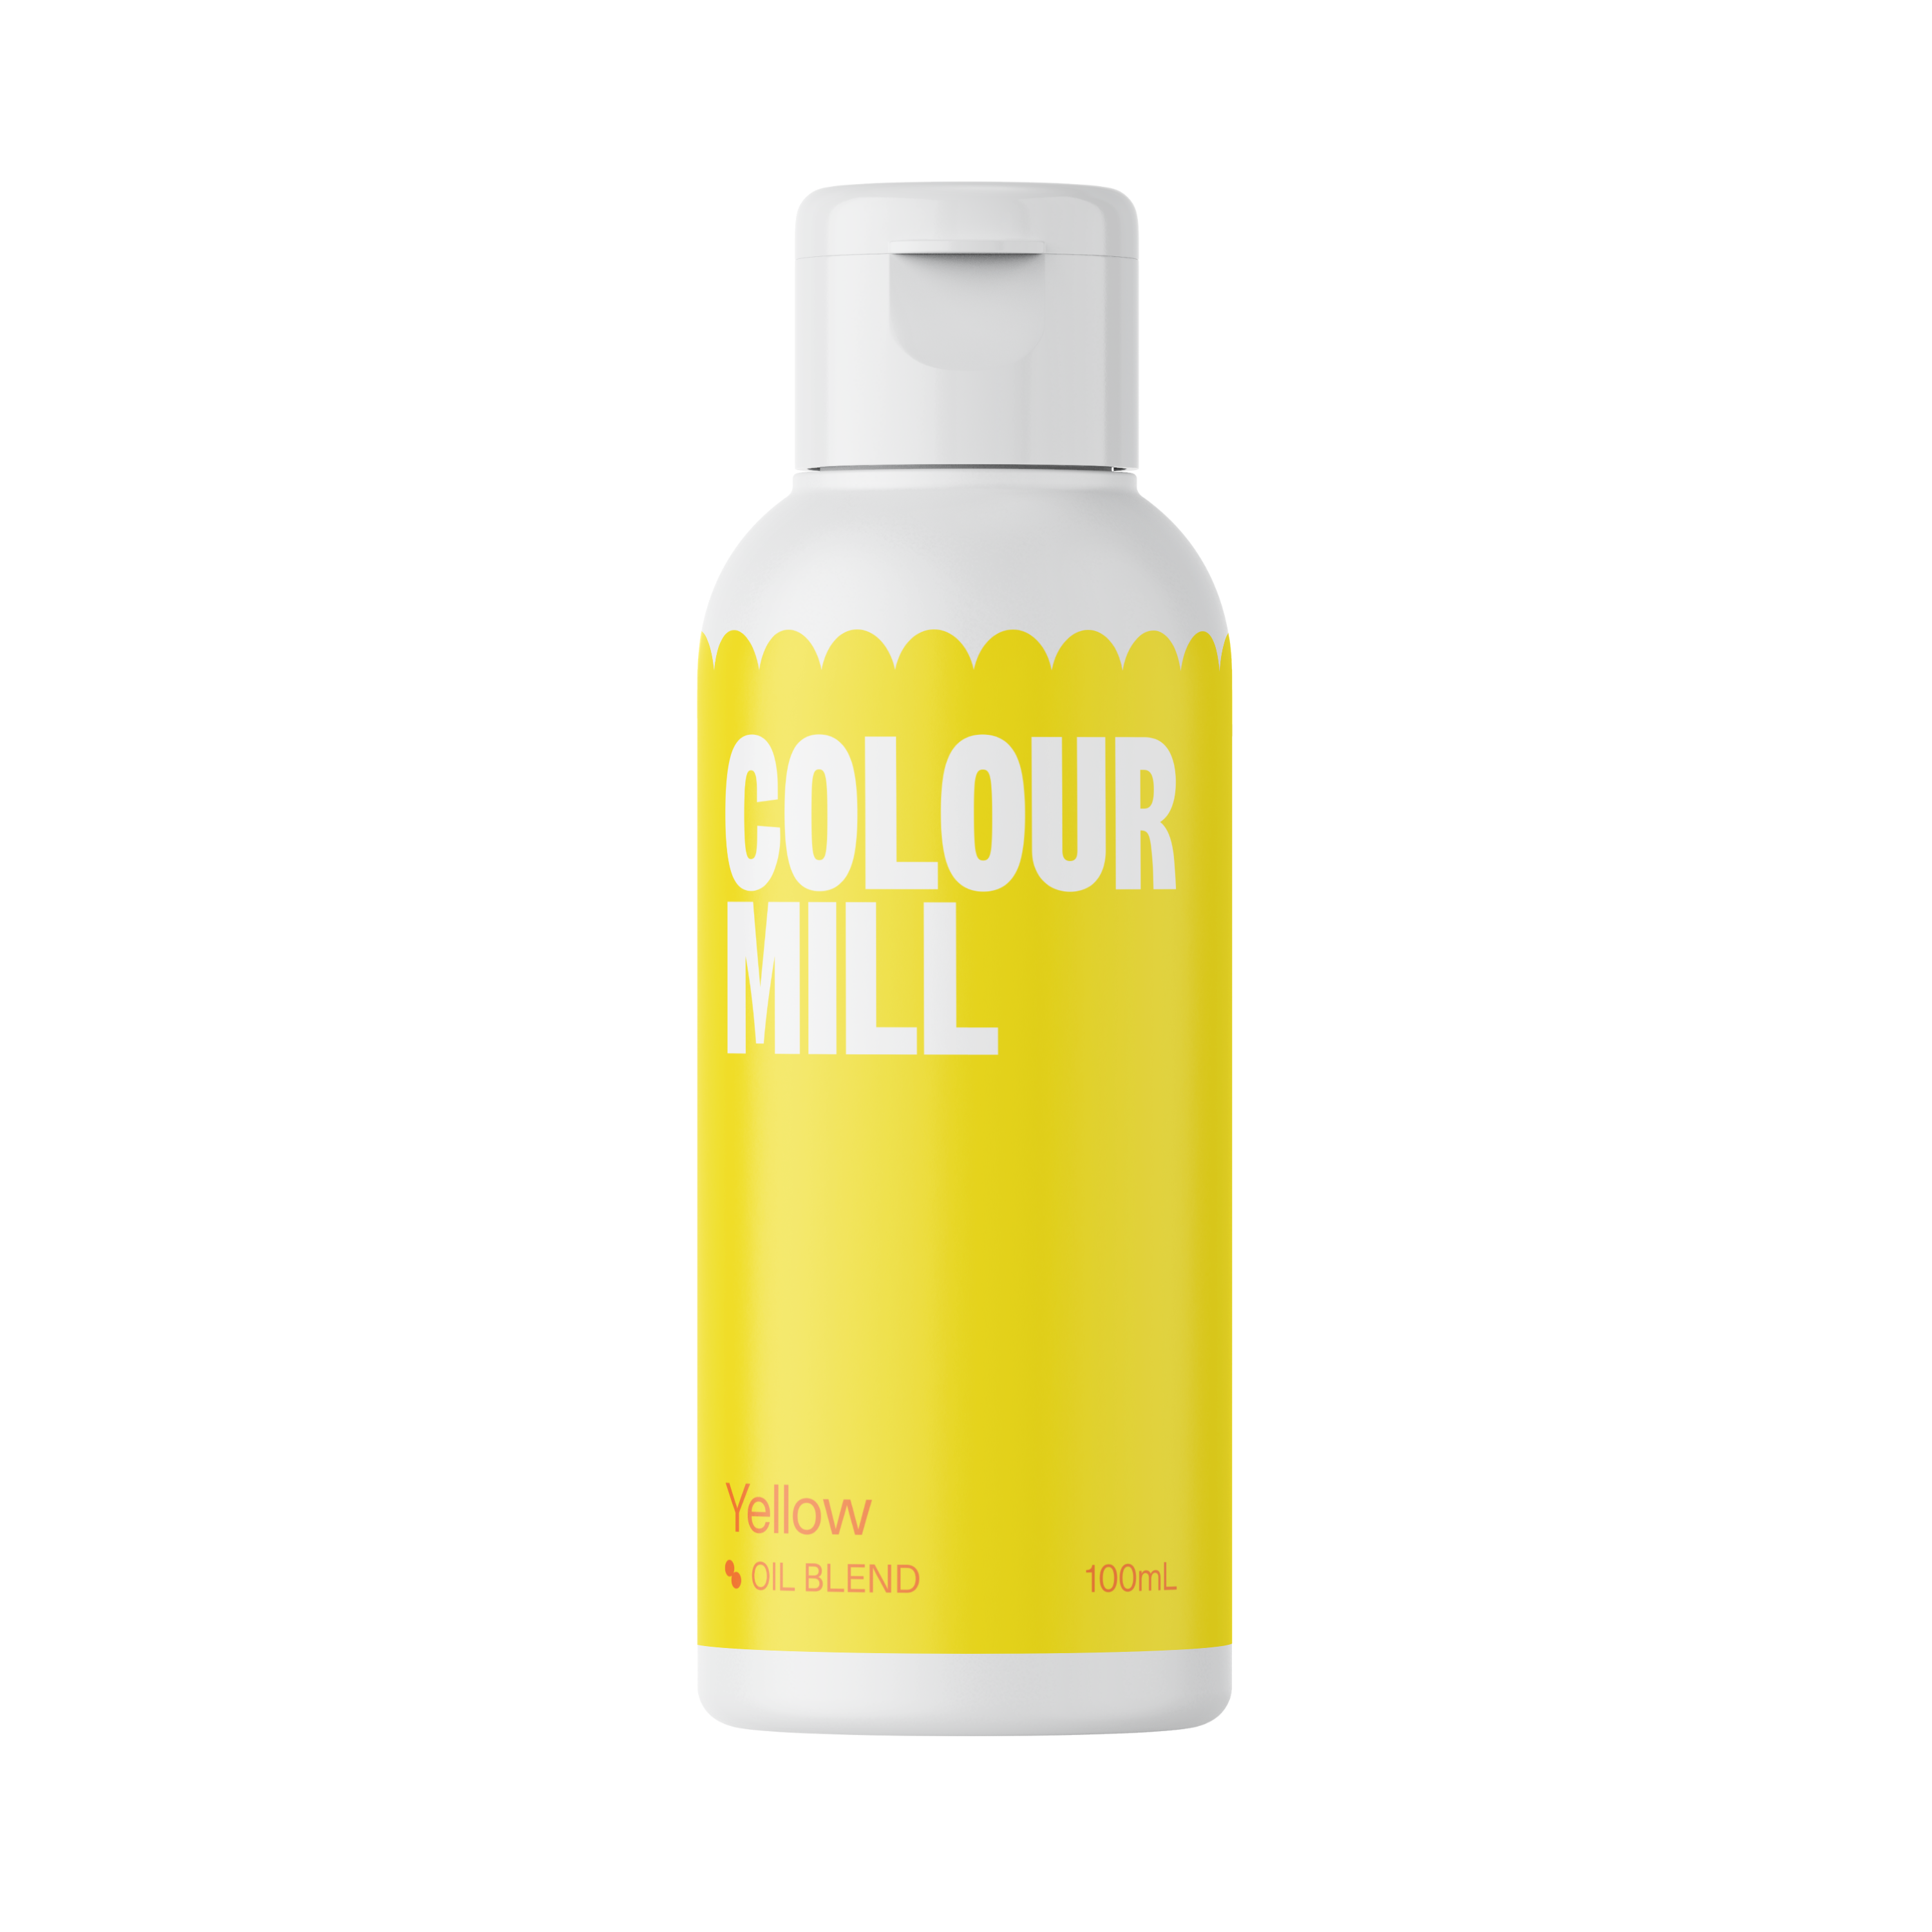 Food Color by Colour Mill in 100 ml. bottle